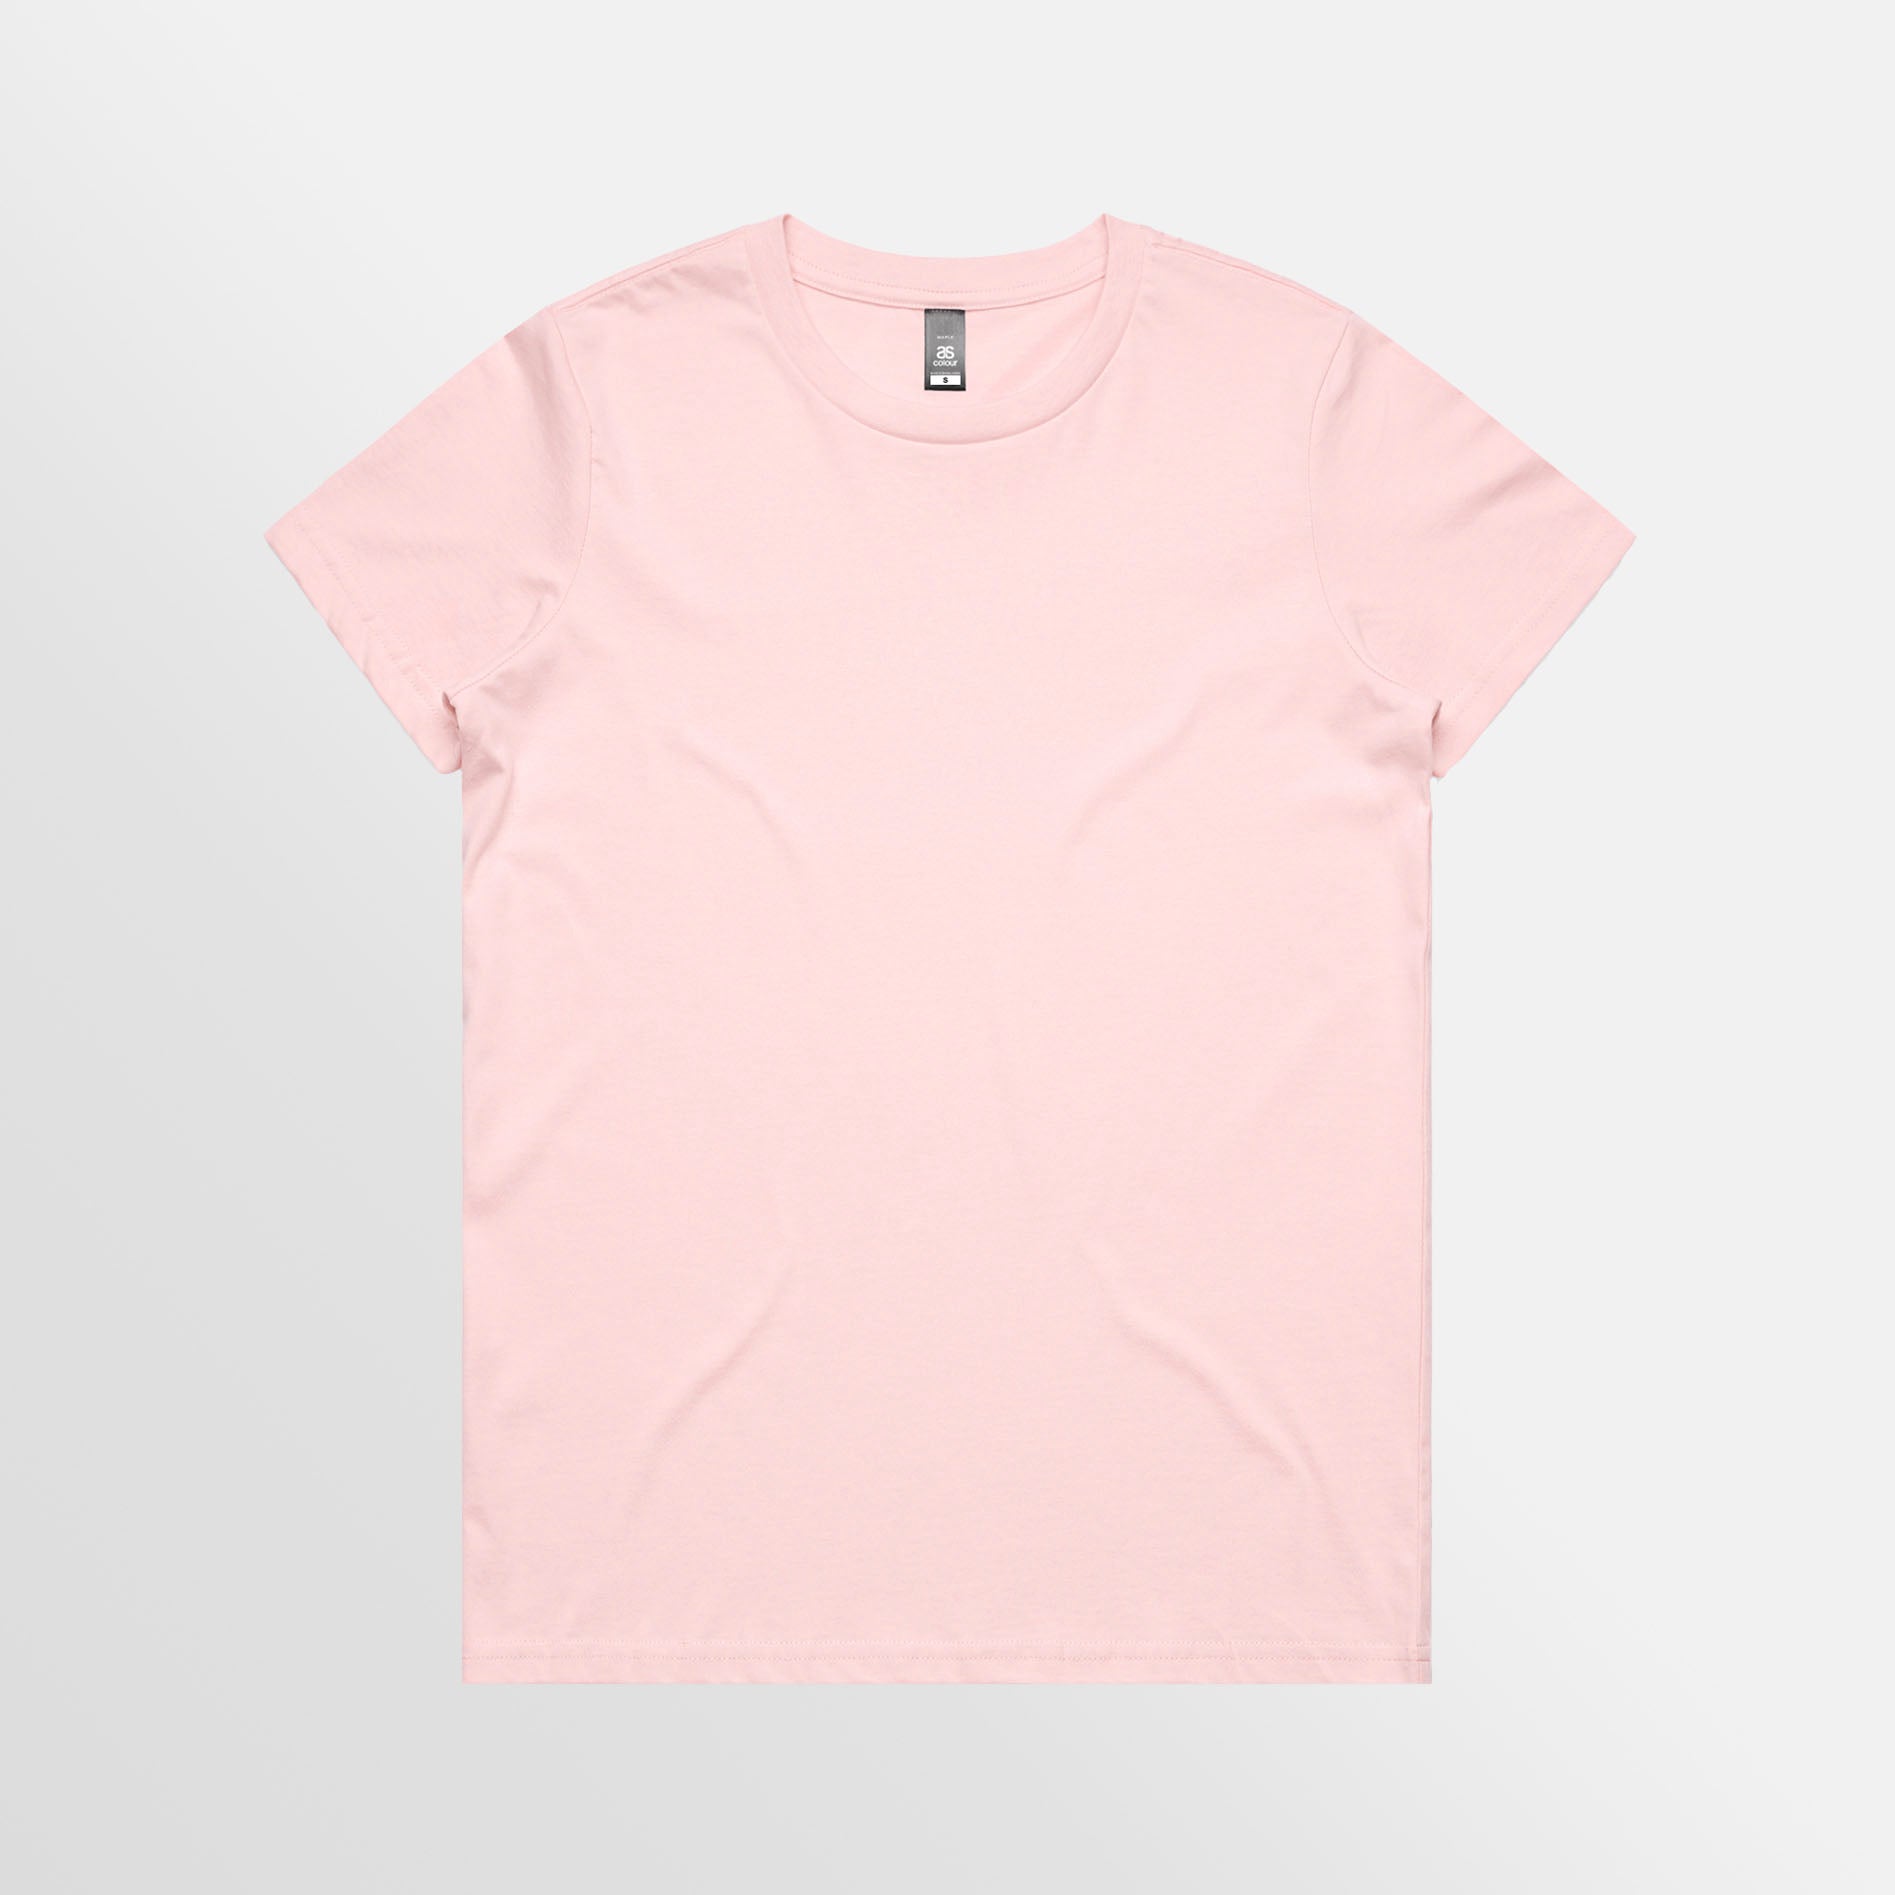 Maple Tee - on request